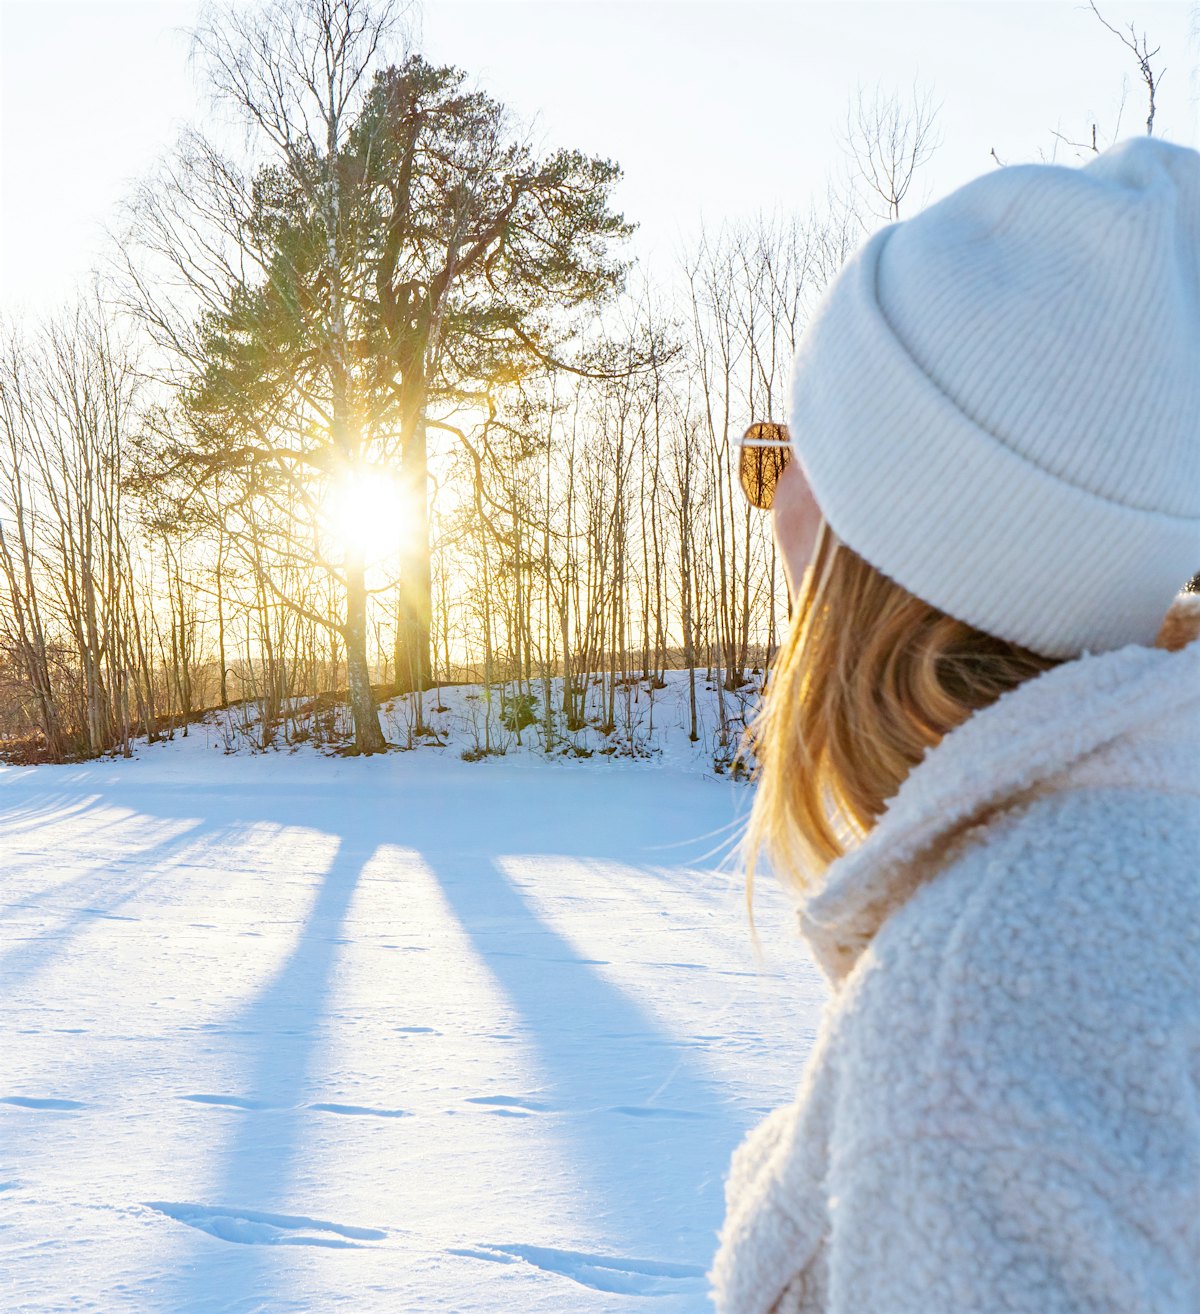 A girl with a hat looks towards the afternoon sun in a winter landscape. Photo